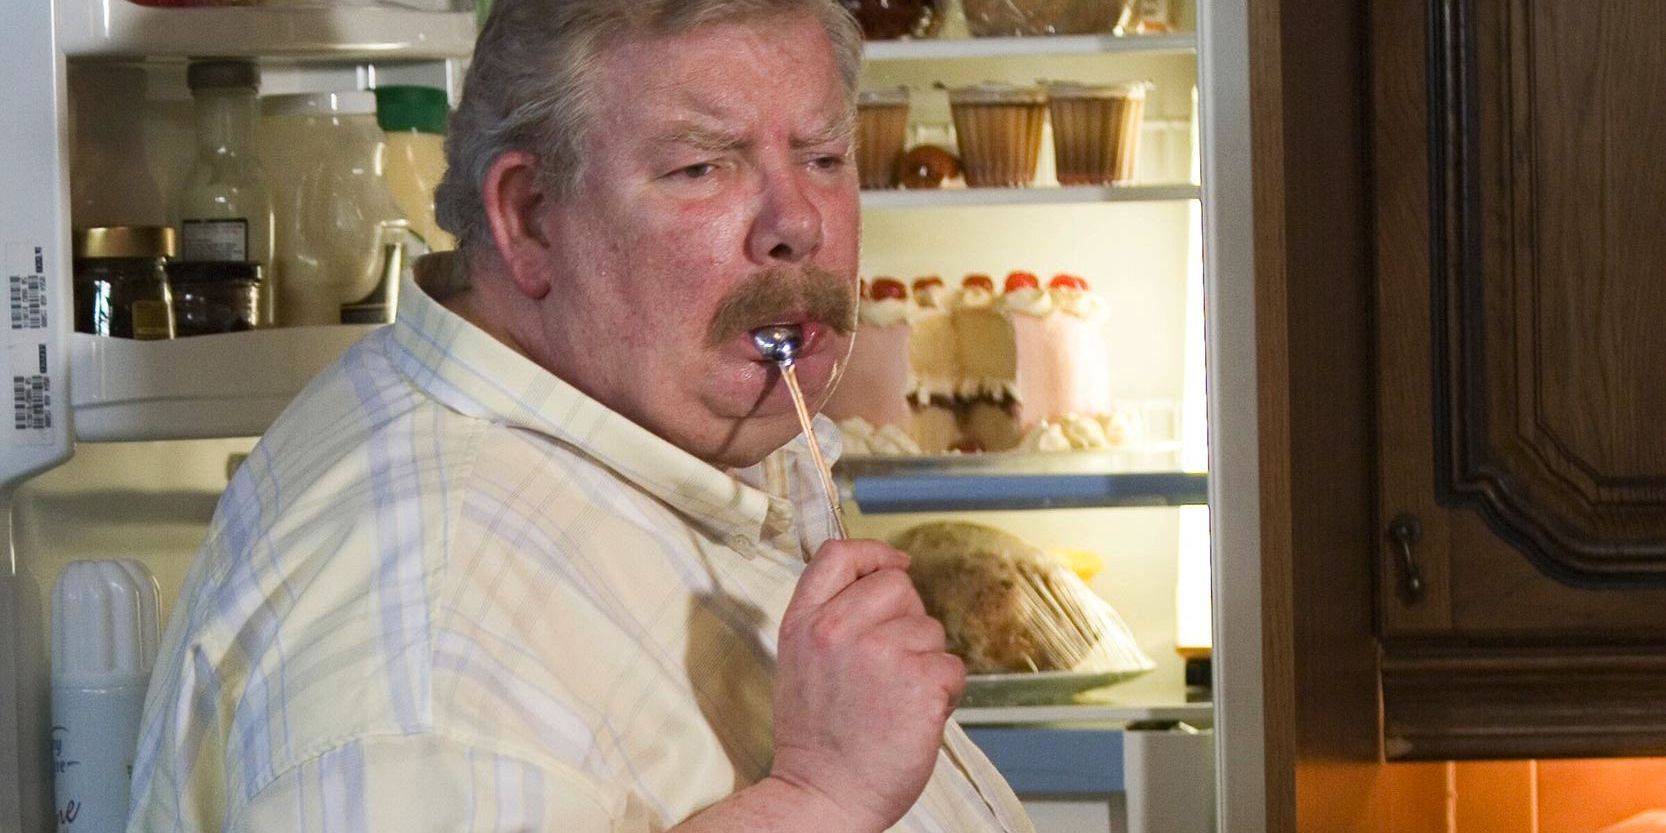 Vernon Dursley with a spoon in his mouth in Harry Potter.